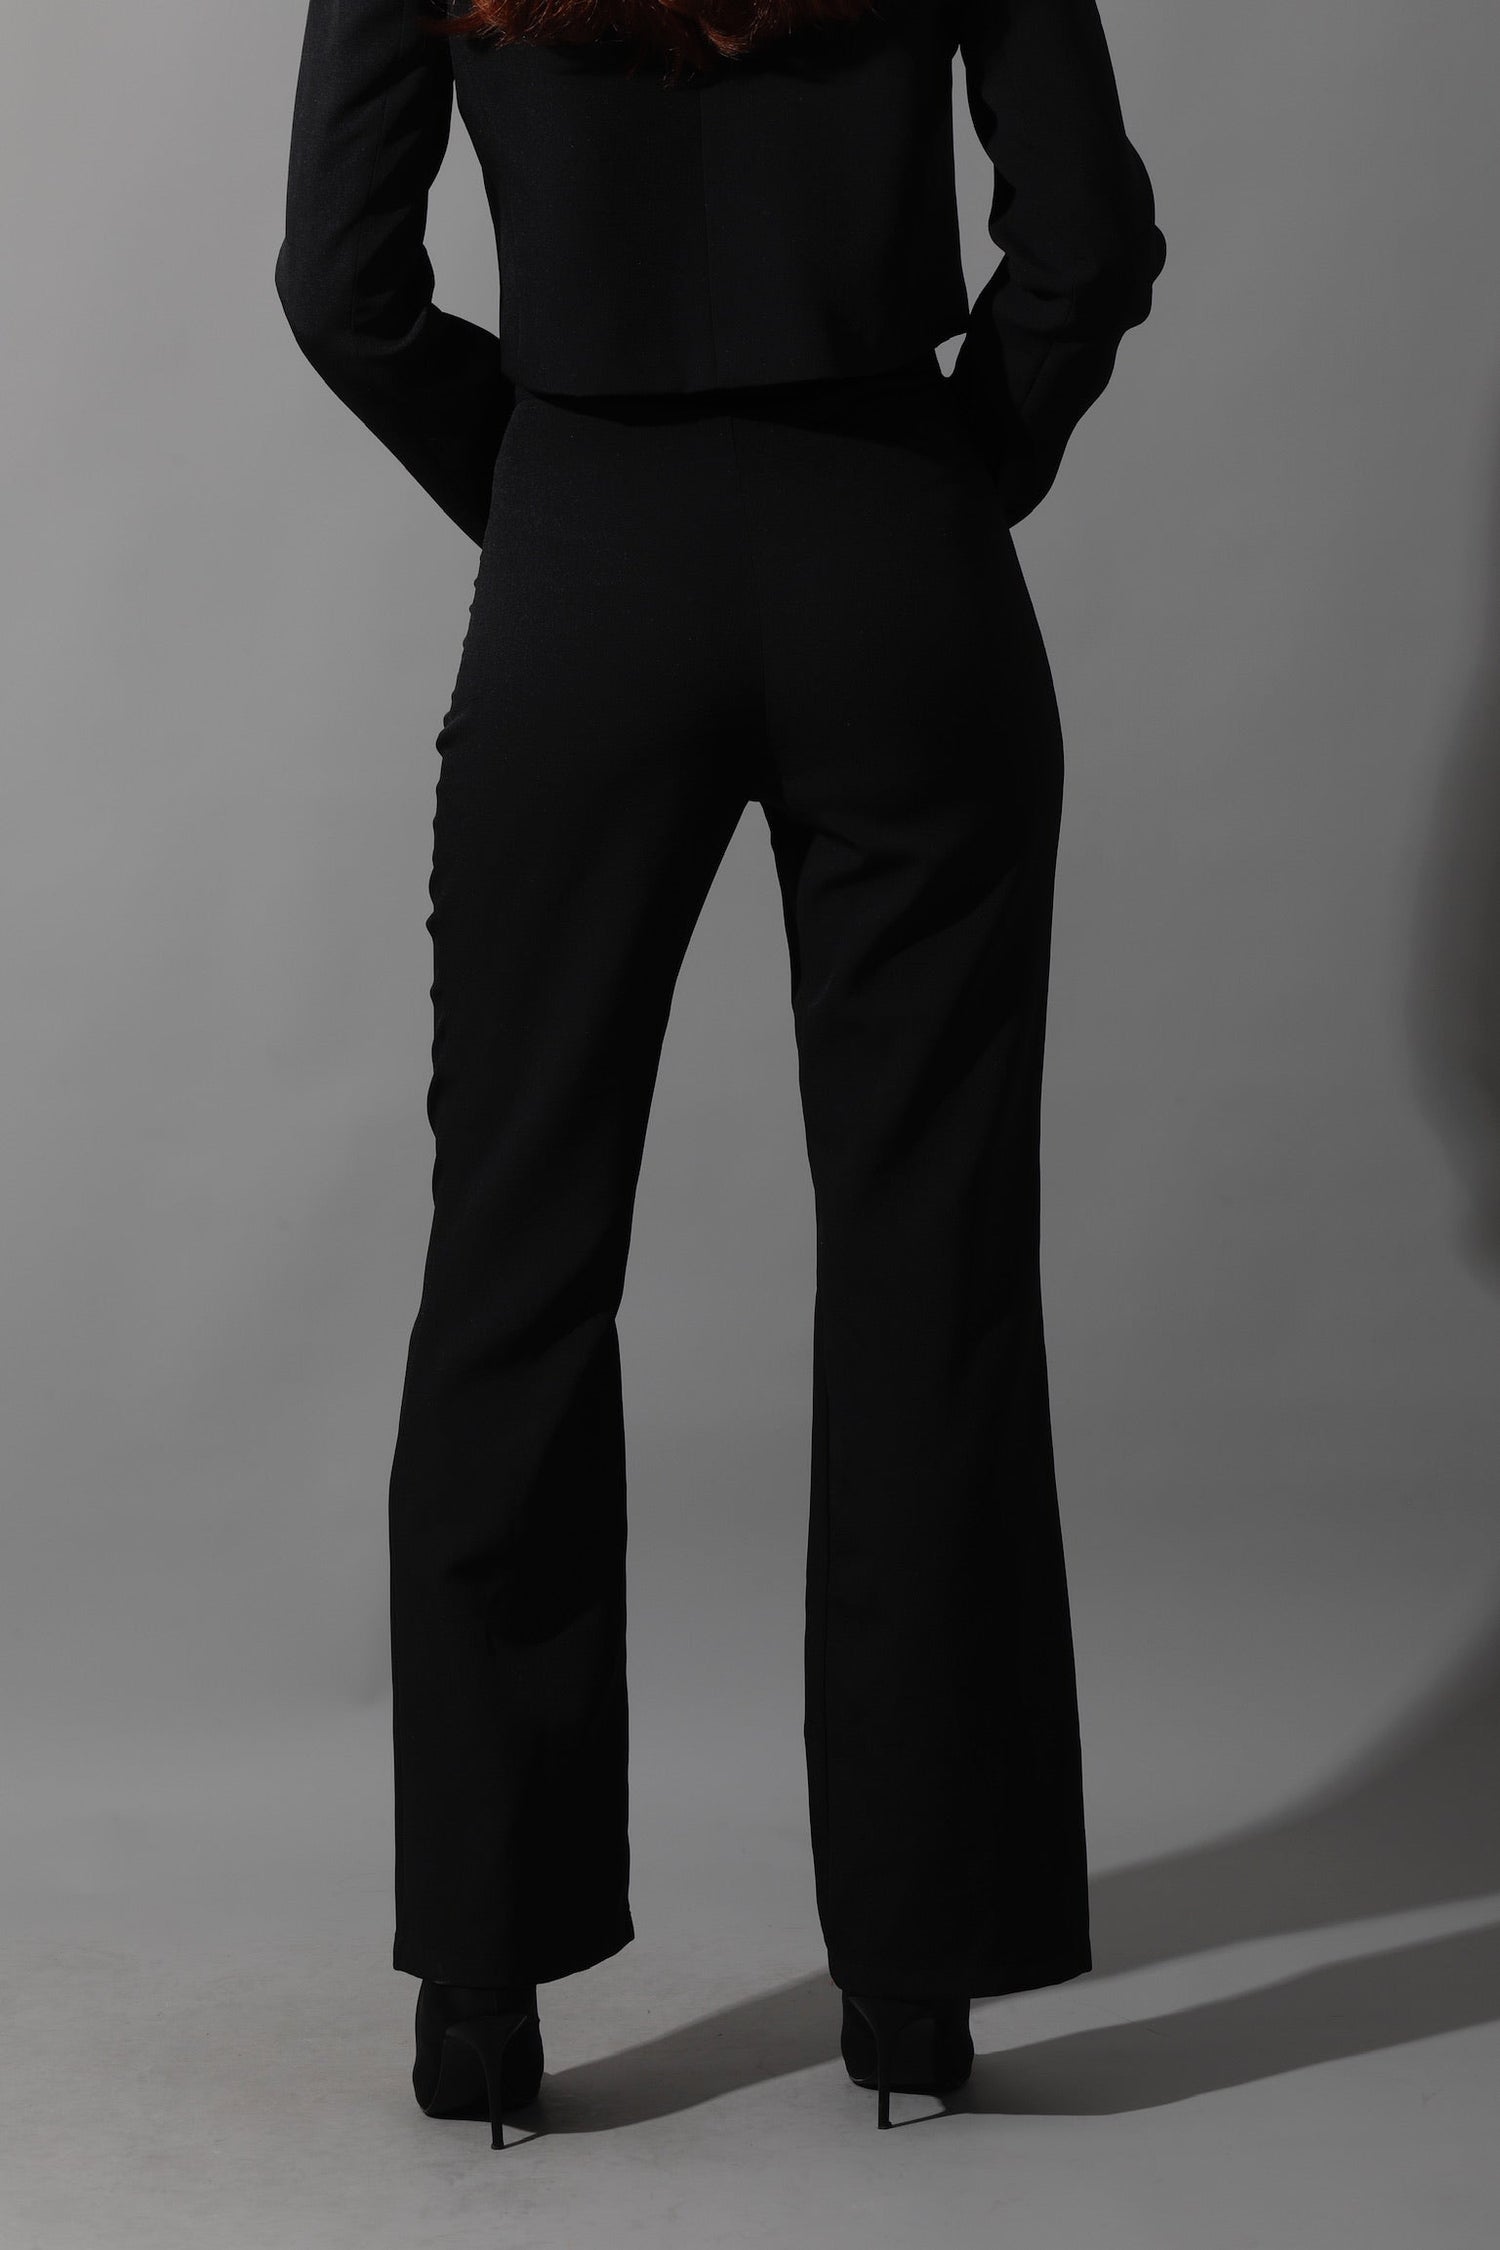 Cropped Double Breasted Suit - Black